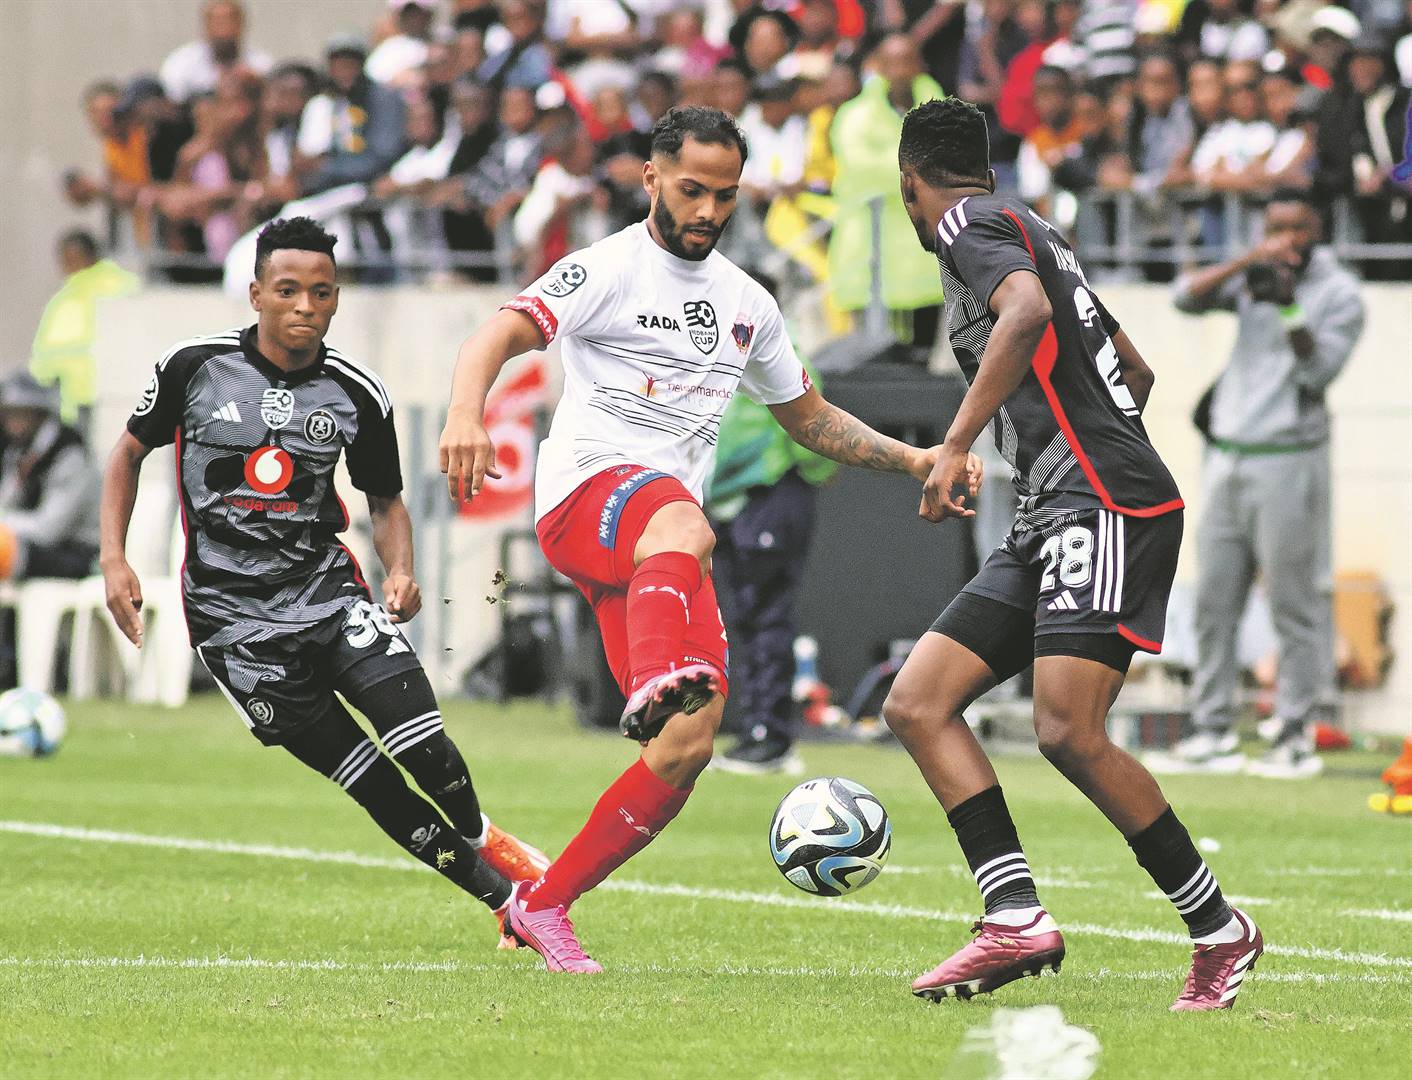 Sirgio Kammies of Chippa United is sandwiched between the Orlando Pirates duo of Relebohile Mofokeng and Patrick Maswanganyi during their Nedbank Cup semifinal at Nelson Mandela Bay Stadium in Gqeberha, Eastern Cape yesterday 